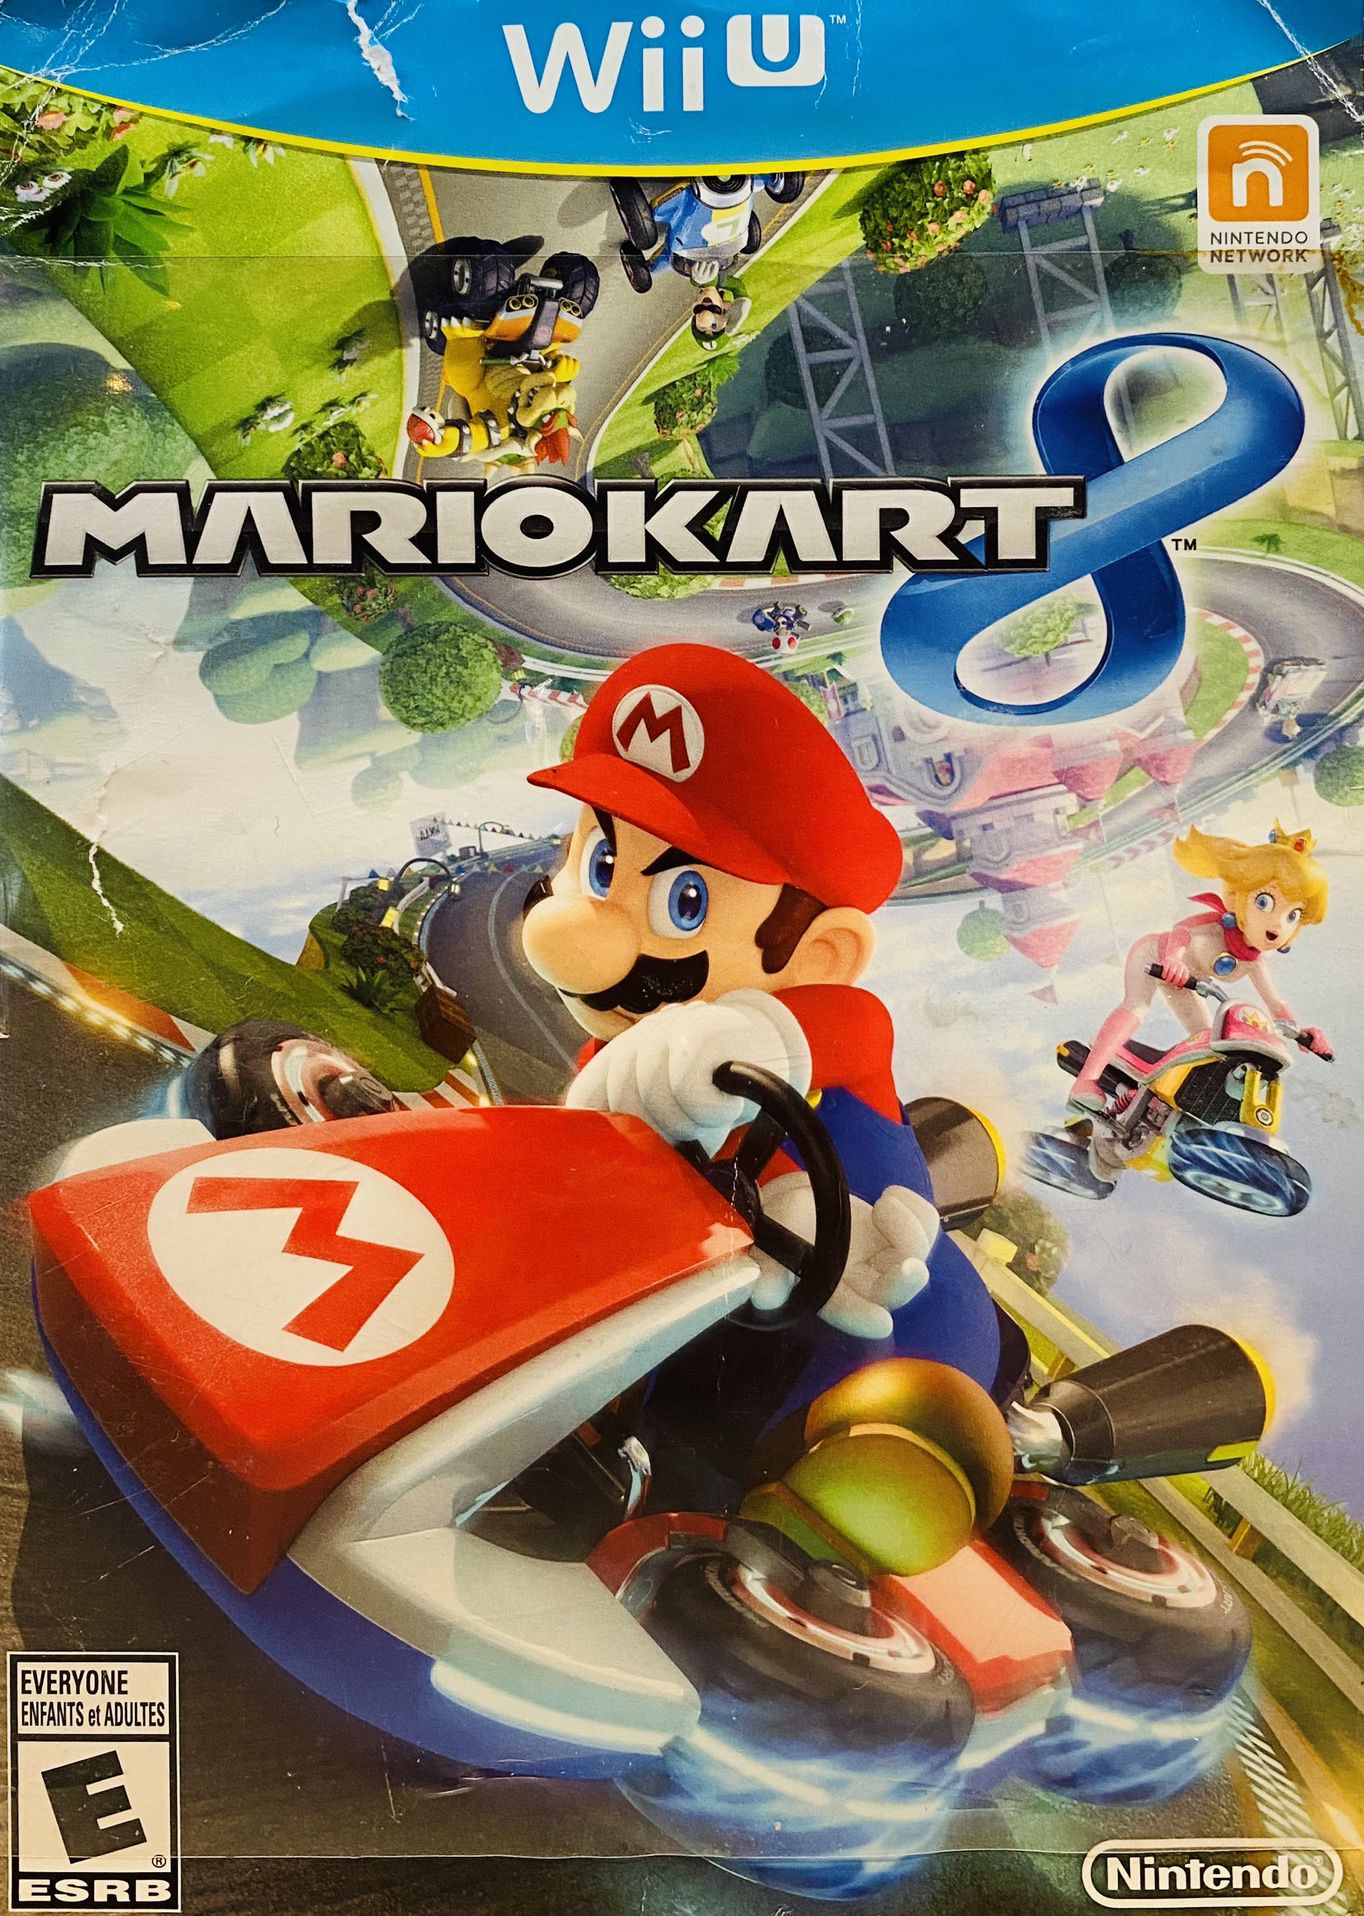 Mario Kart 8 Nintendo Wii U Console Game Complete Manual CIB Tested Disc Works